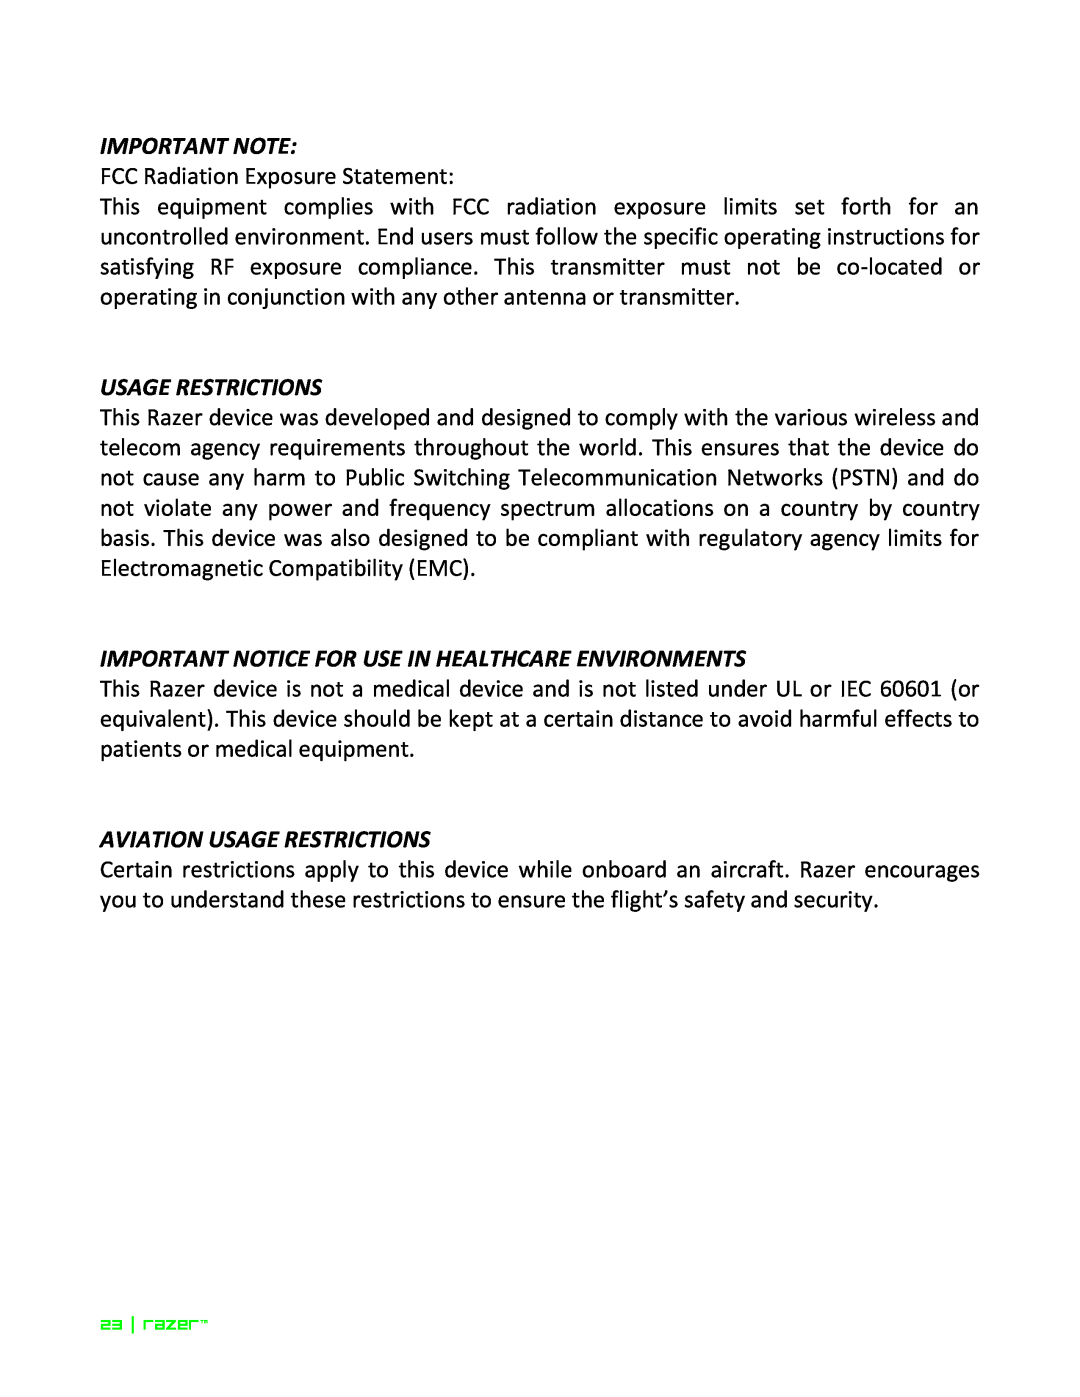 Razer Razer Edge Pro manual Important Note, Usage Restrictions, Important Notice For Use In Healthcare Environments 